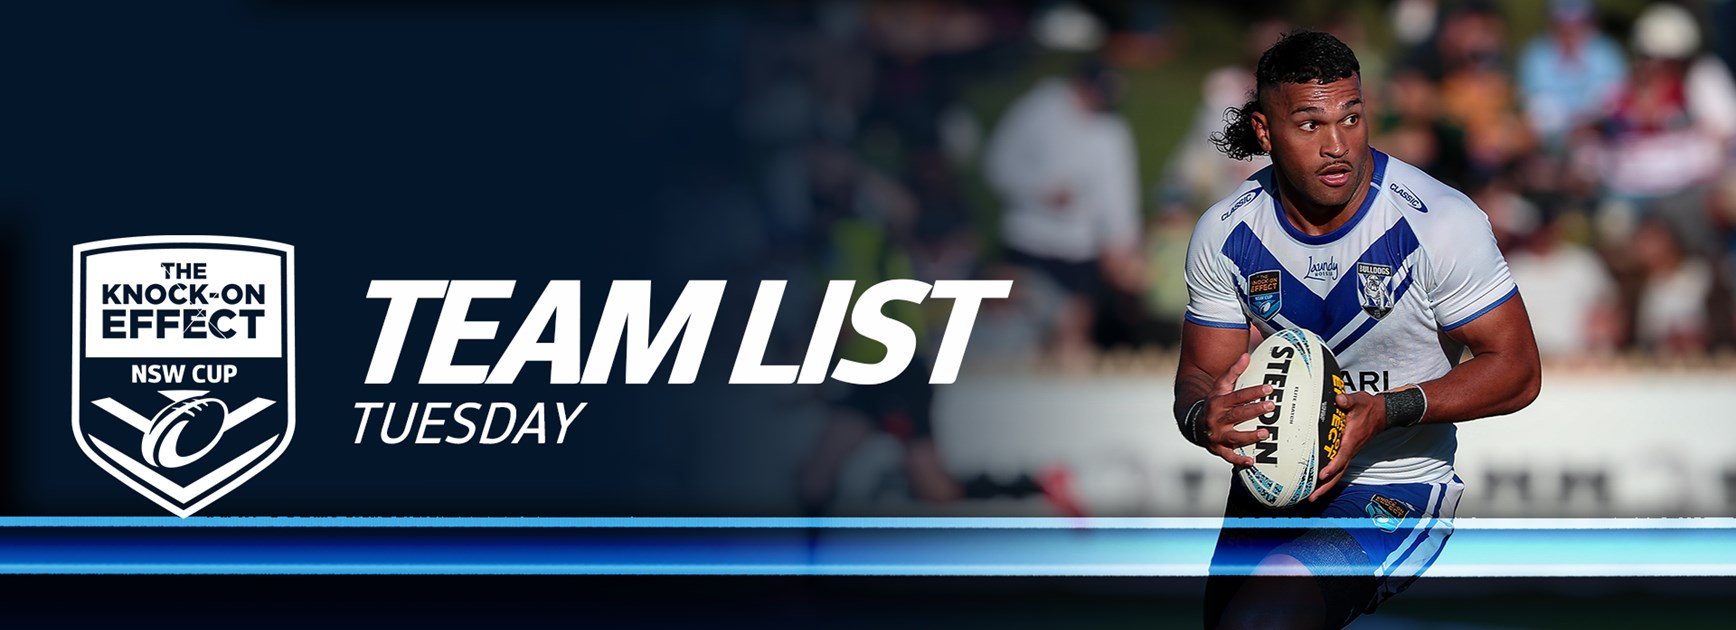 Team List Tuesday | The Knock-On Effect NSW Cup - Round 12